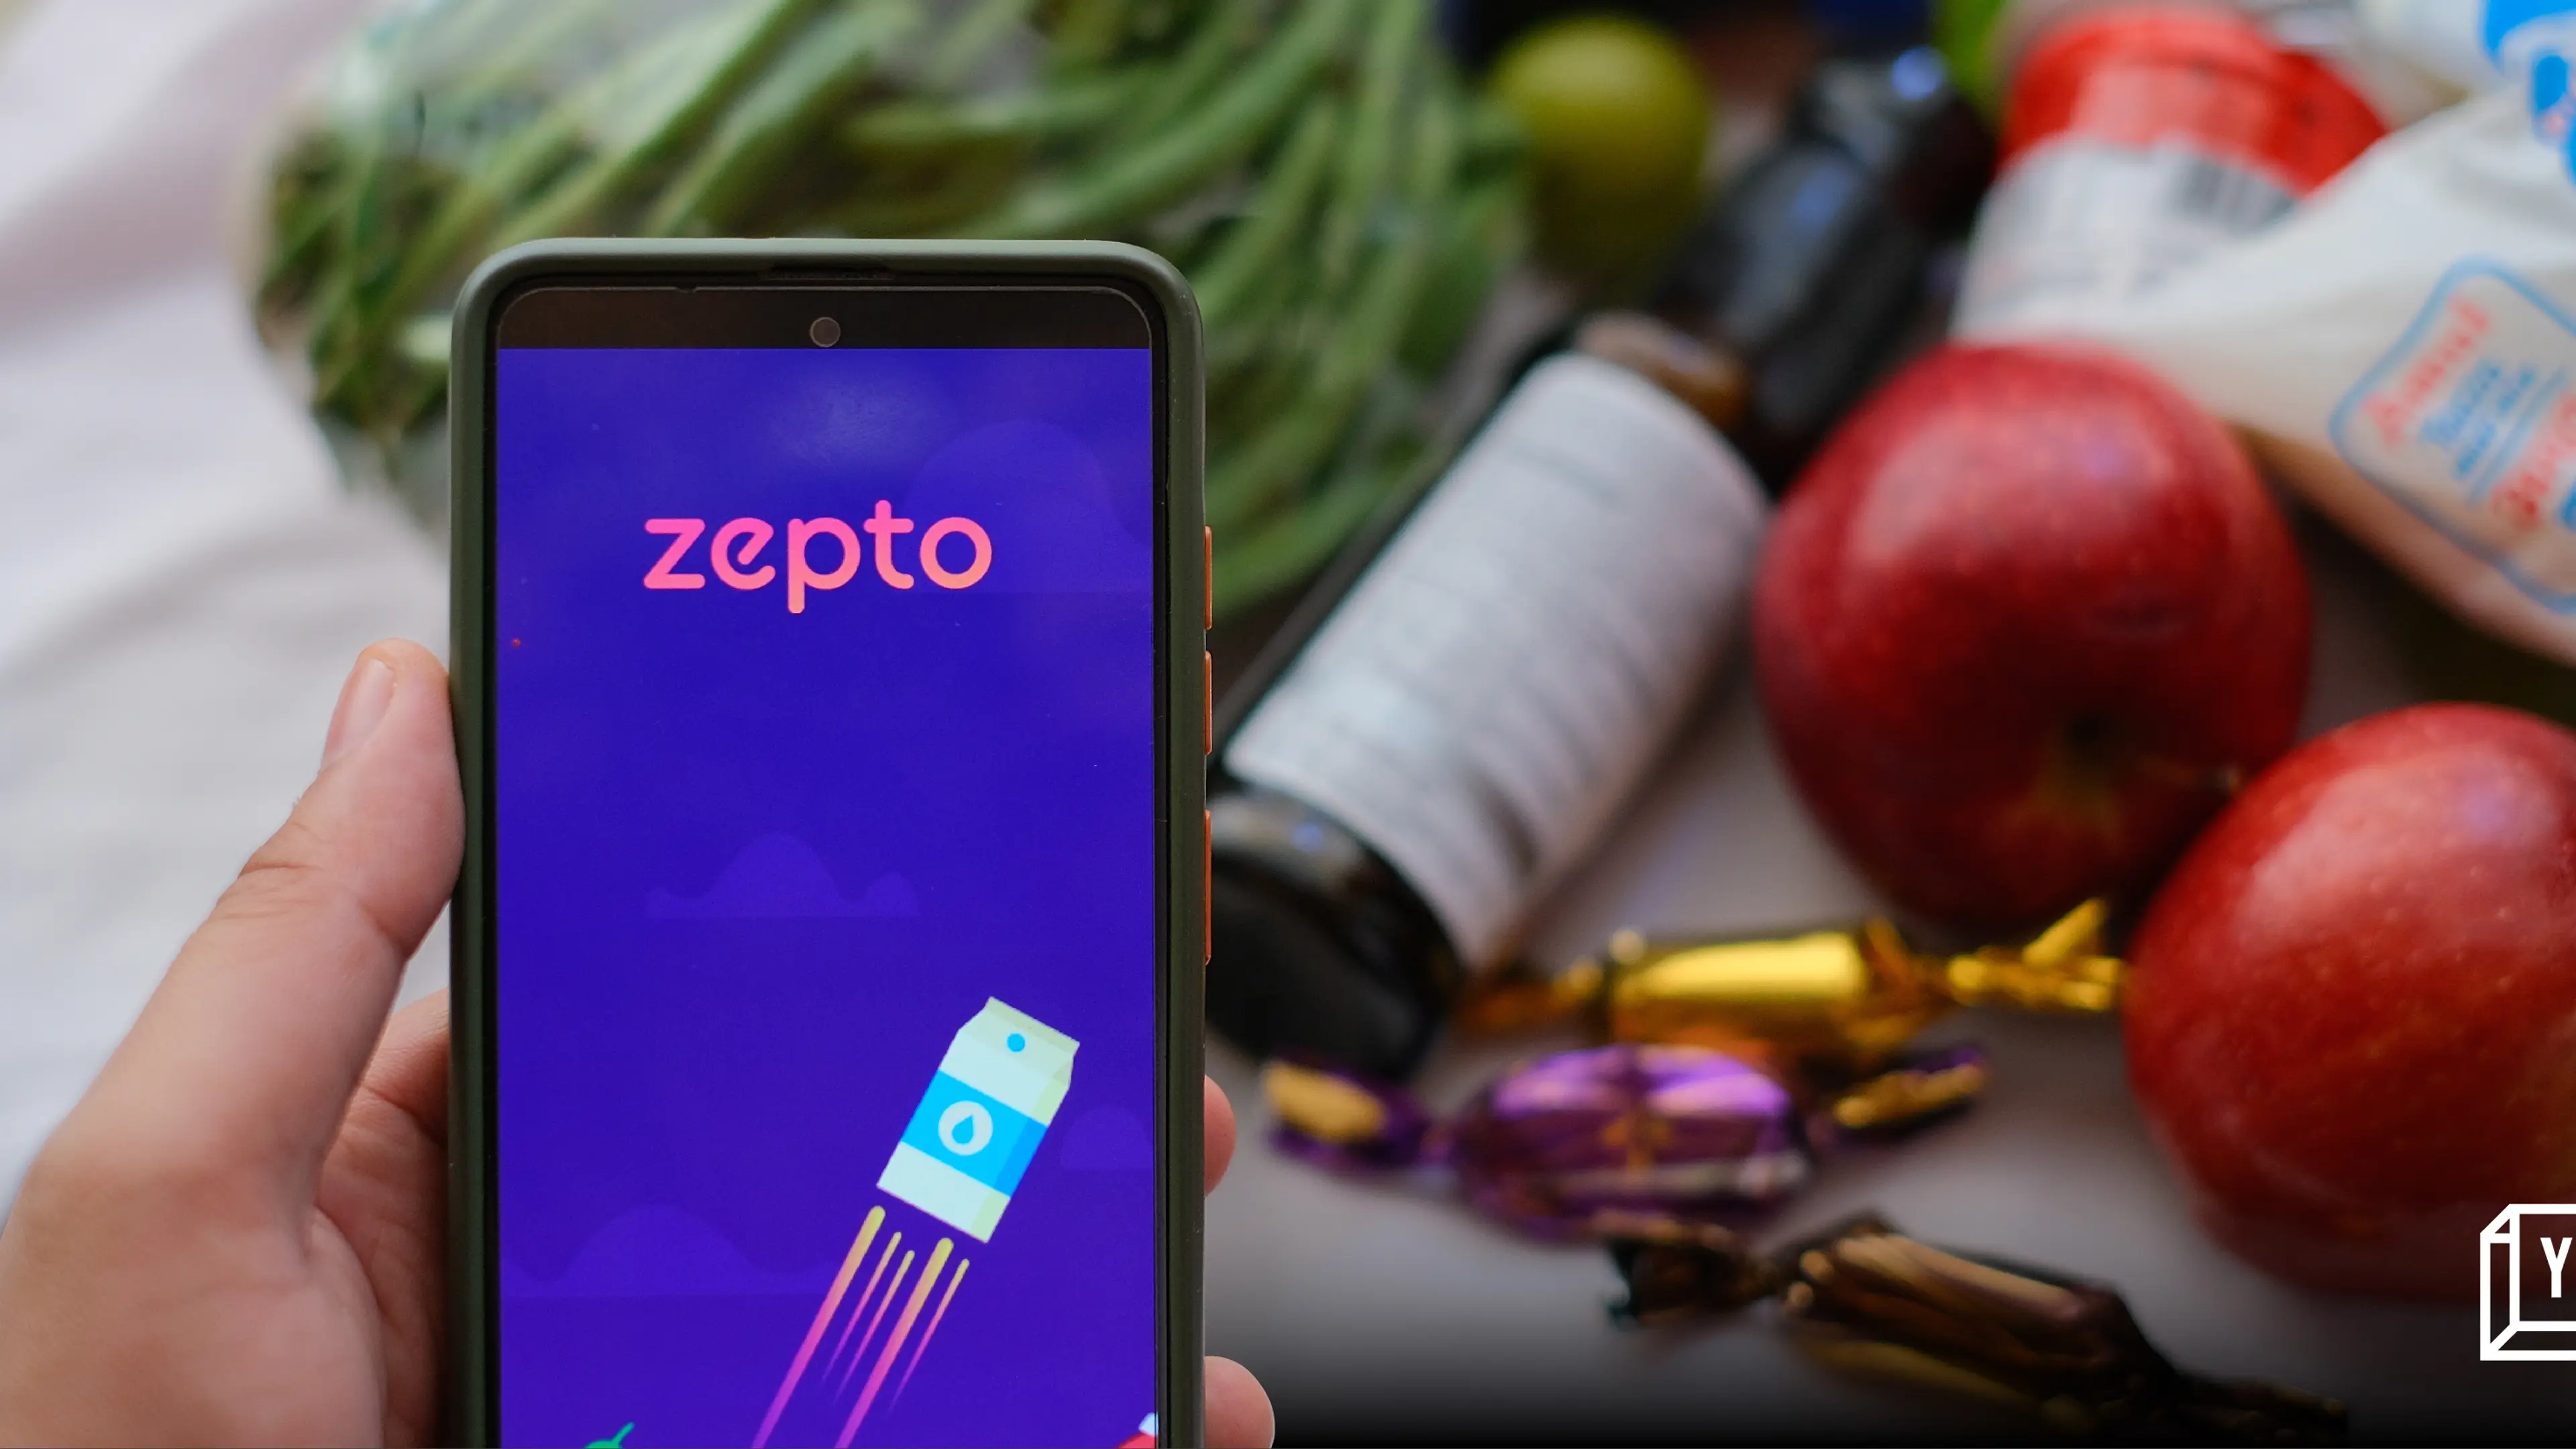 Zepto in talks for another fundraise at a valuation of $4.6B: Report